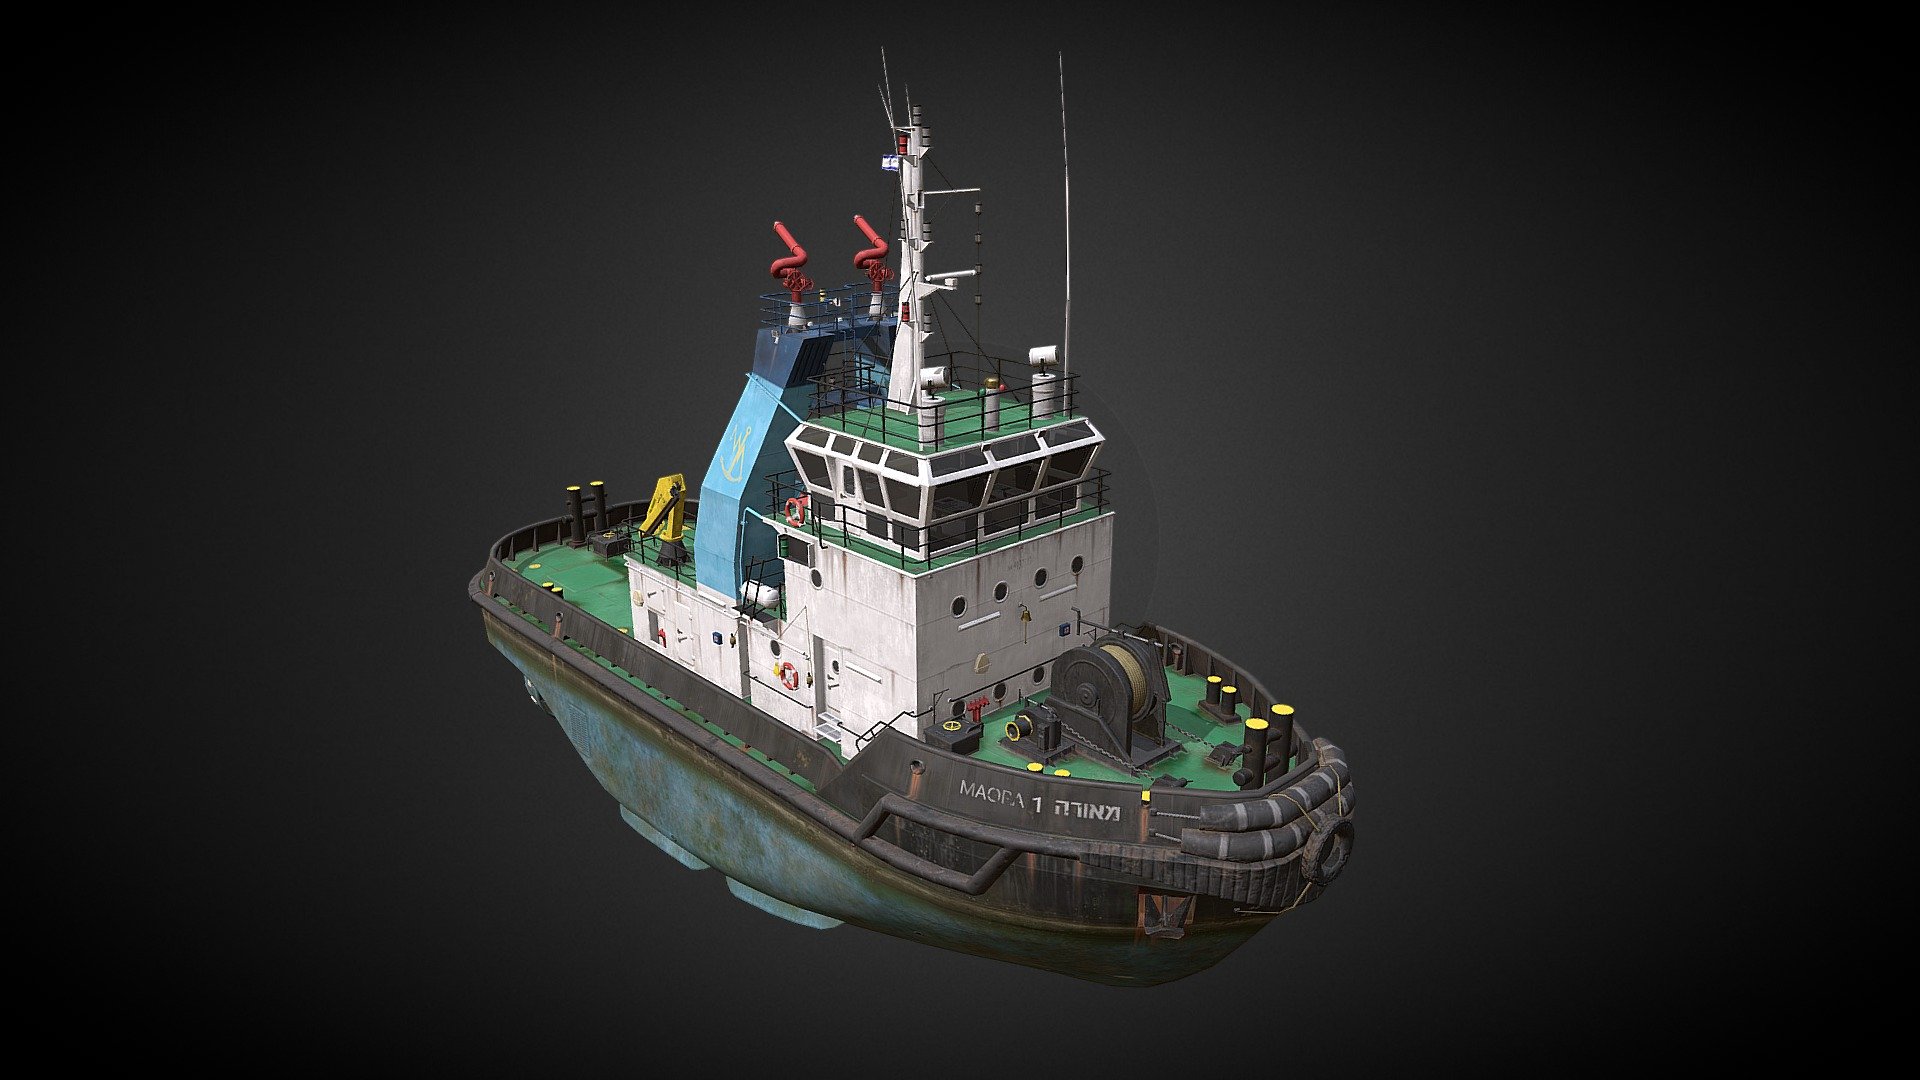 Hello my friend. Glad to see you!
This time I want to show you my work done as part of my studies at the Lesta 3D Academy.This is a game model of a tugboat. 
I set myself the task of putting in 25 thousand polygons. I almost succeeded:)
Since the location of the game camera was meant at a long and medium distance, I allowed myself to save polygons in different places that you can try to find :)
For this model, according to the assignment, I needed to keep within a texel of at least 0.4 and a texture size of 2048x2048. 
It was an interesting experience.
Thank you for your attention, see you later! - Tugboat - 3D model by Werdi 3d model